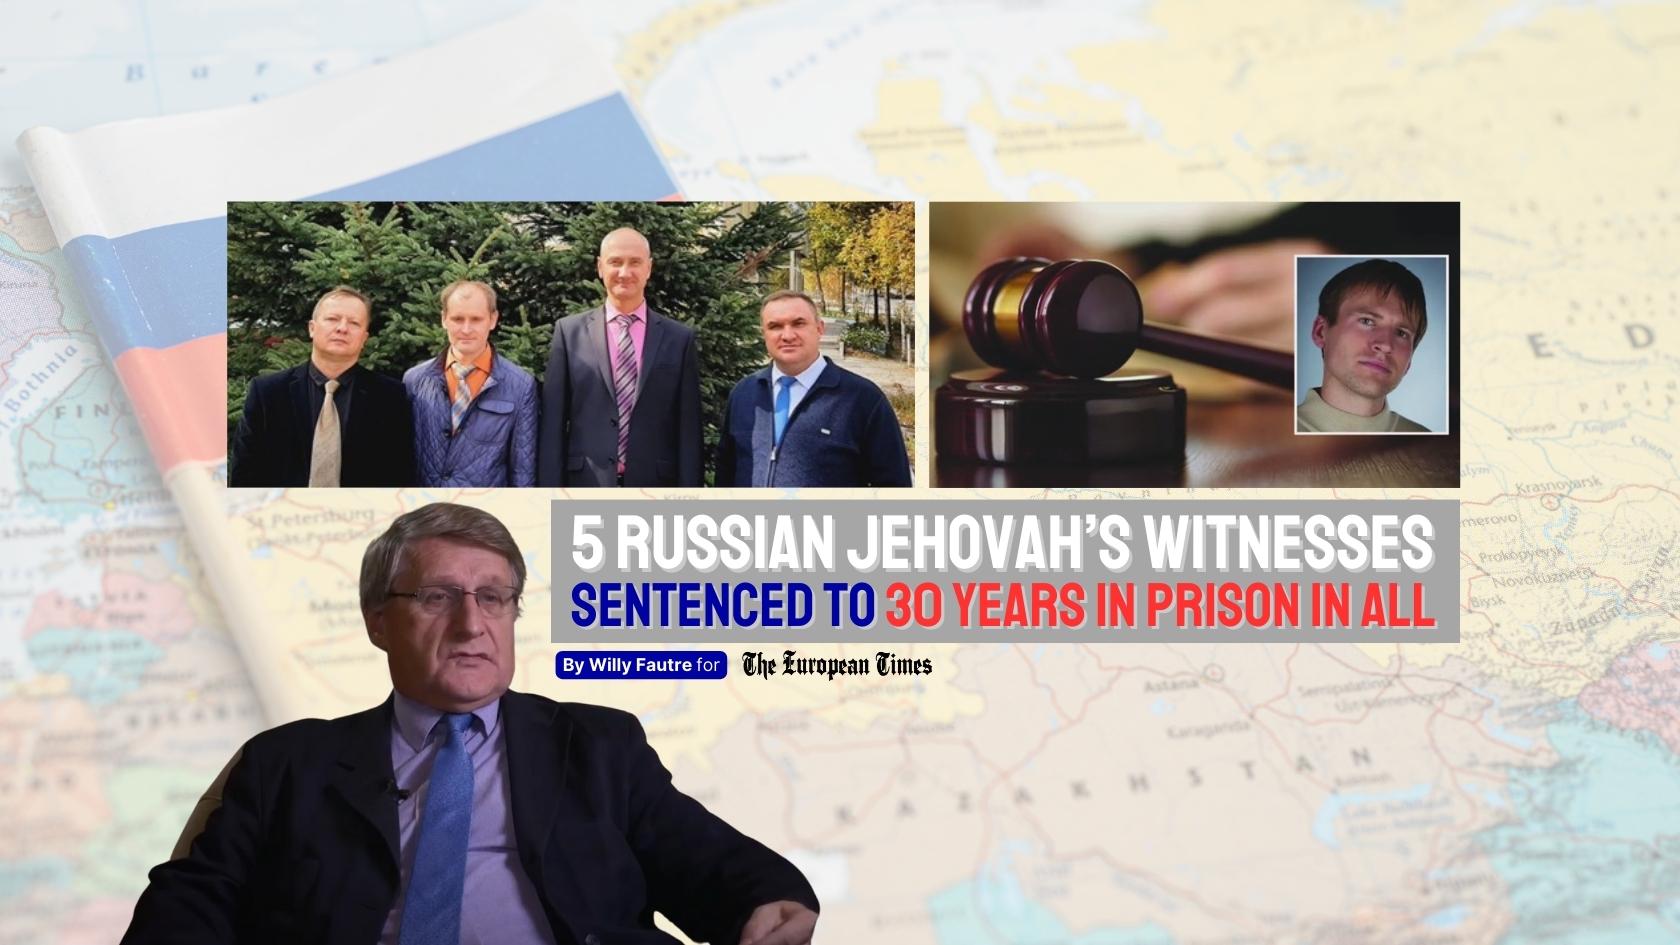 Five Russian Jehovah’s Witnesses sentenced to 30 years in prison in all